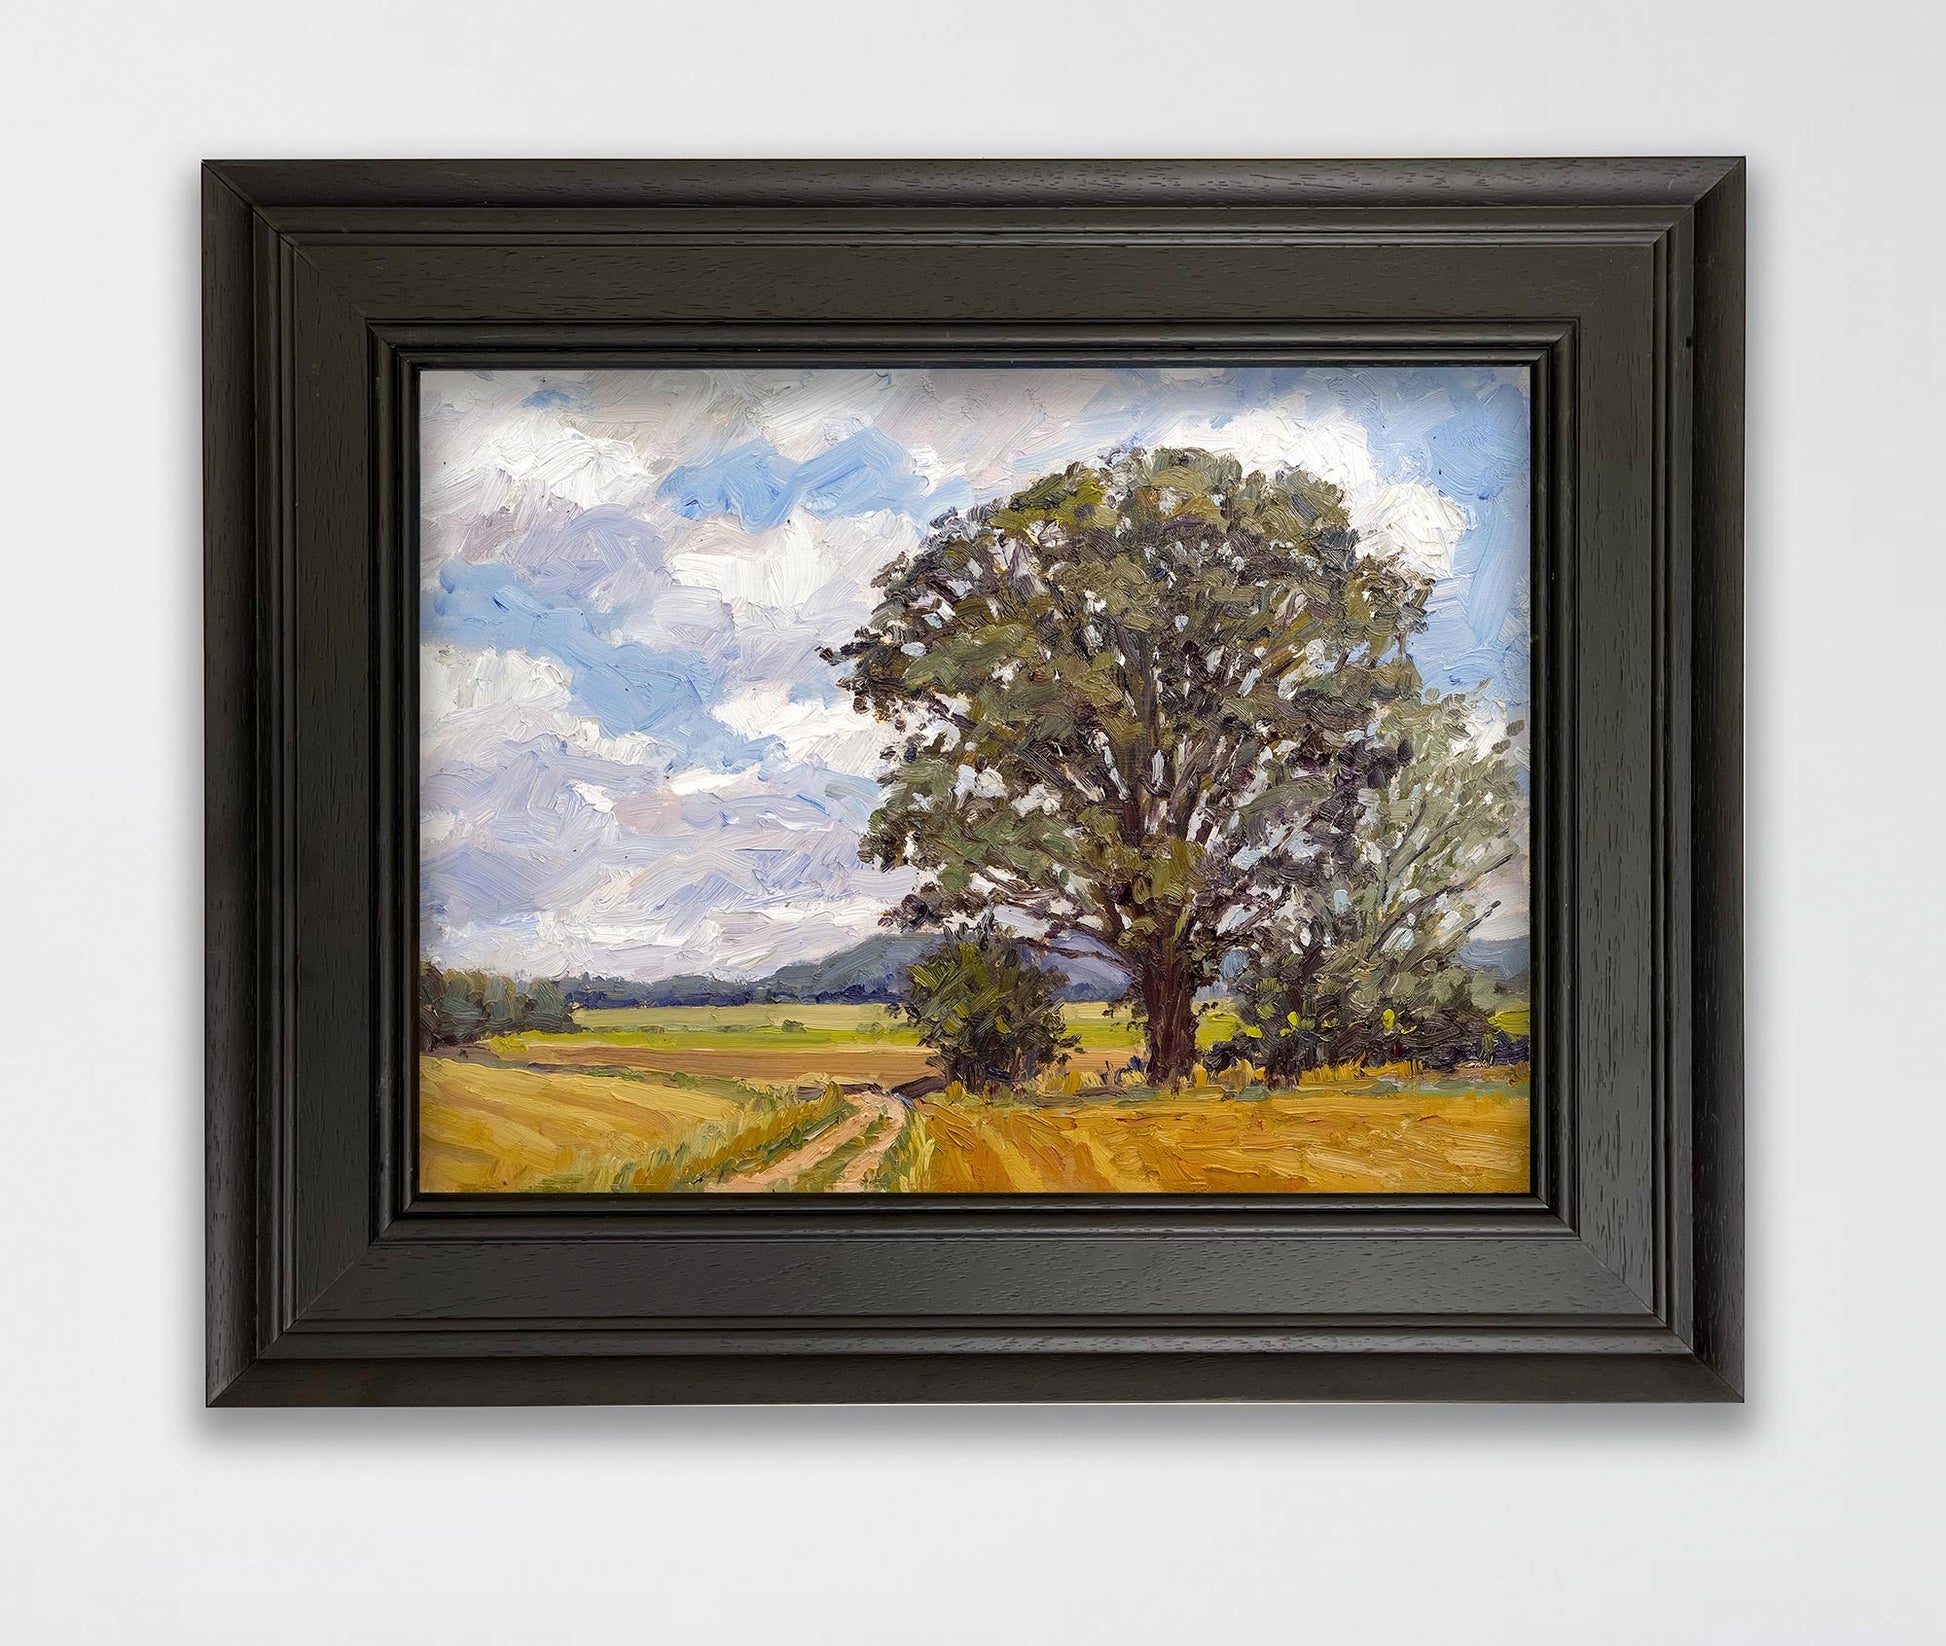 Towards Bulmer, North Yorkshire, original oil painting by Jeff Parker, framed view